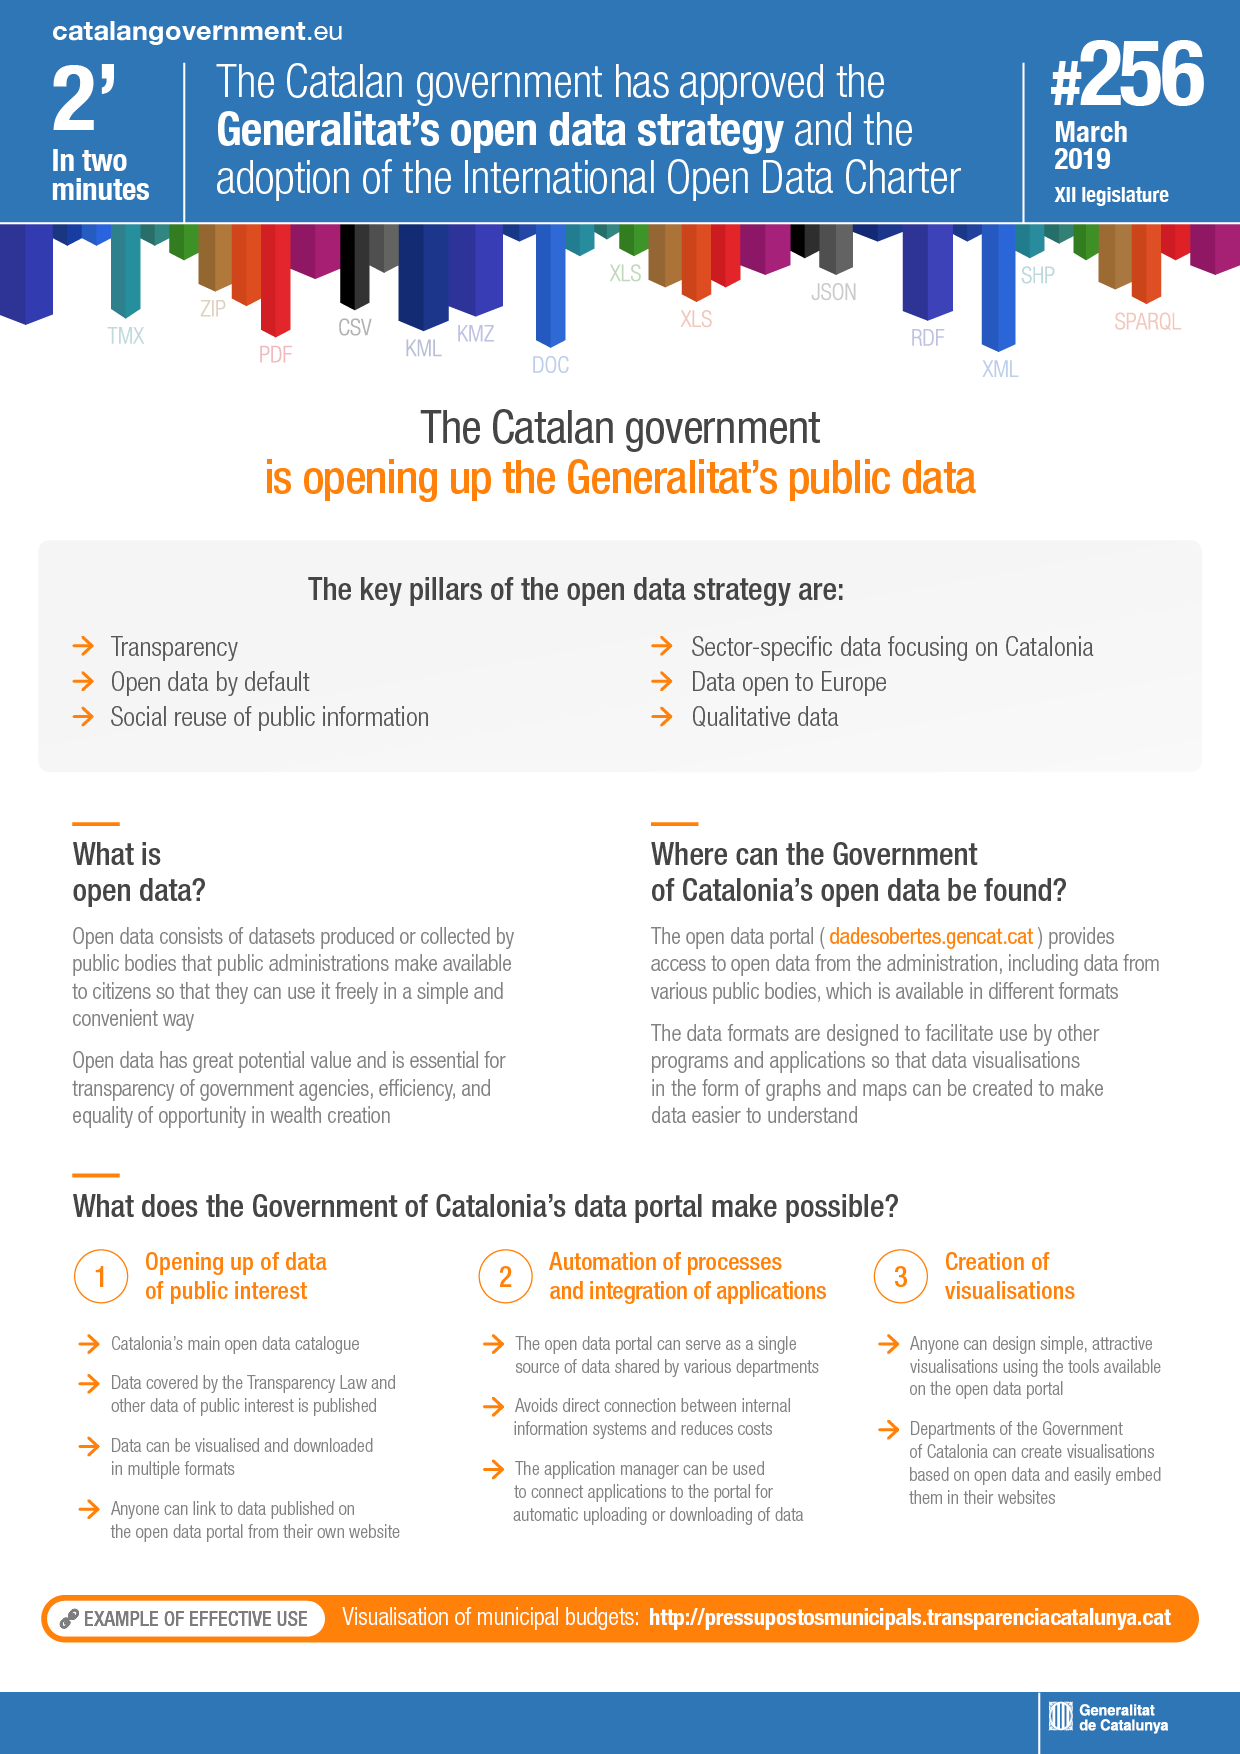 The Catalan government has approved the Generalitat's open data strategy and the adoption of the International Open Data Charter